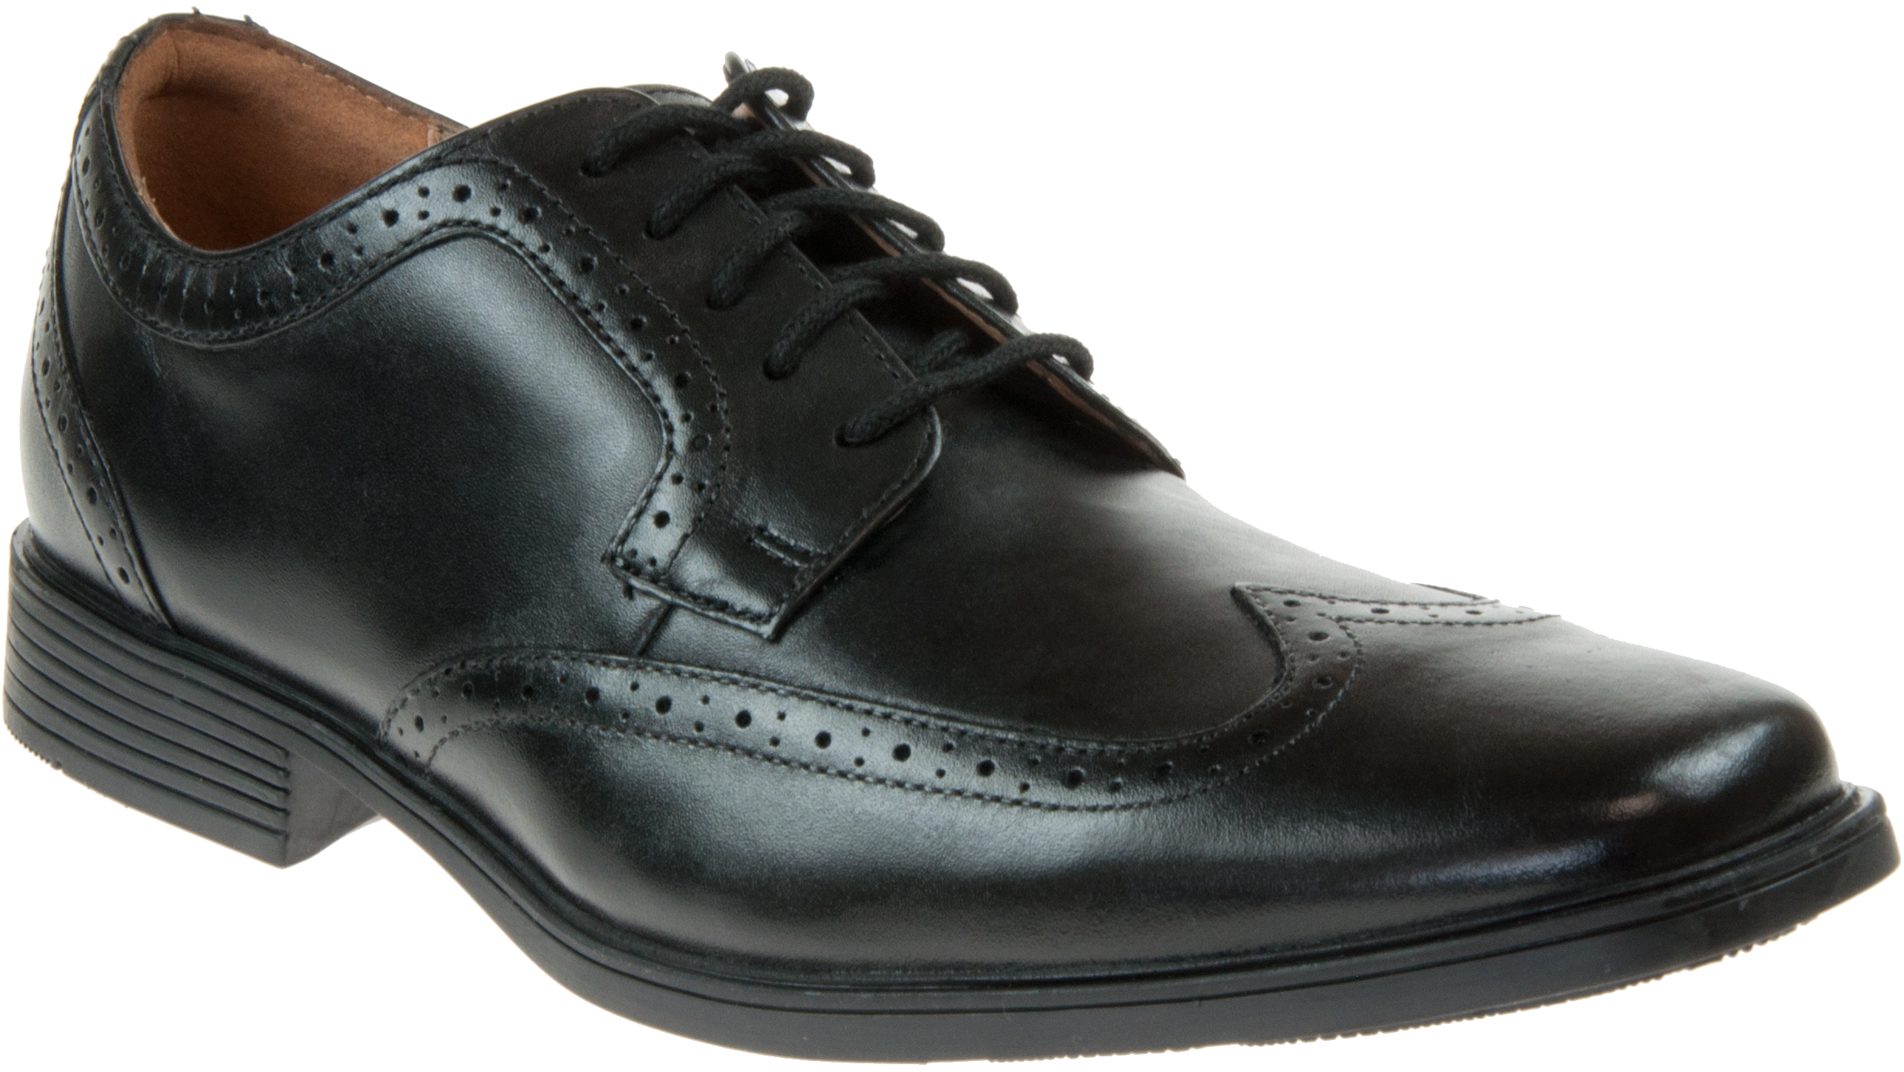 Clarks Tilden Wing Black Leather 26146219 - Formal Shoes - Humphries Shoes